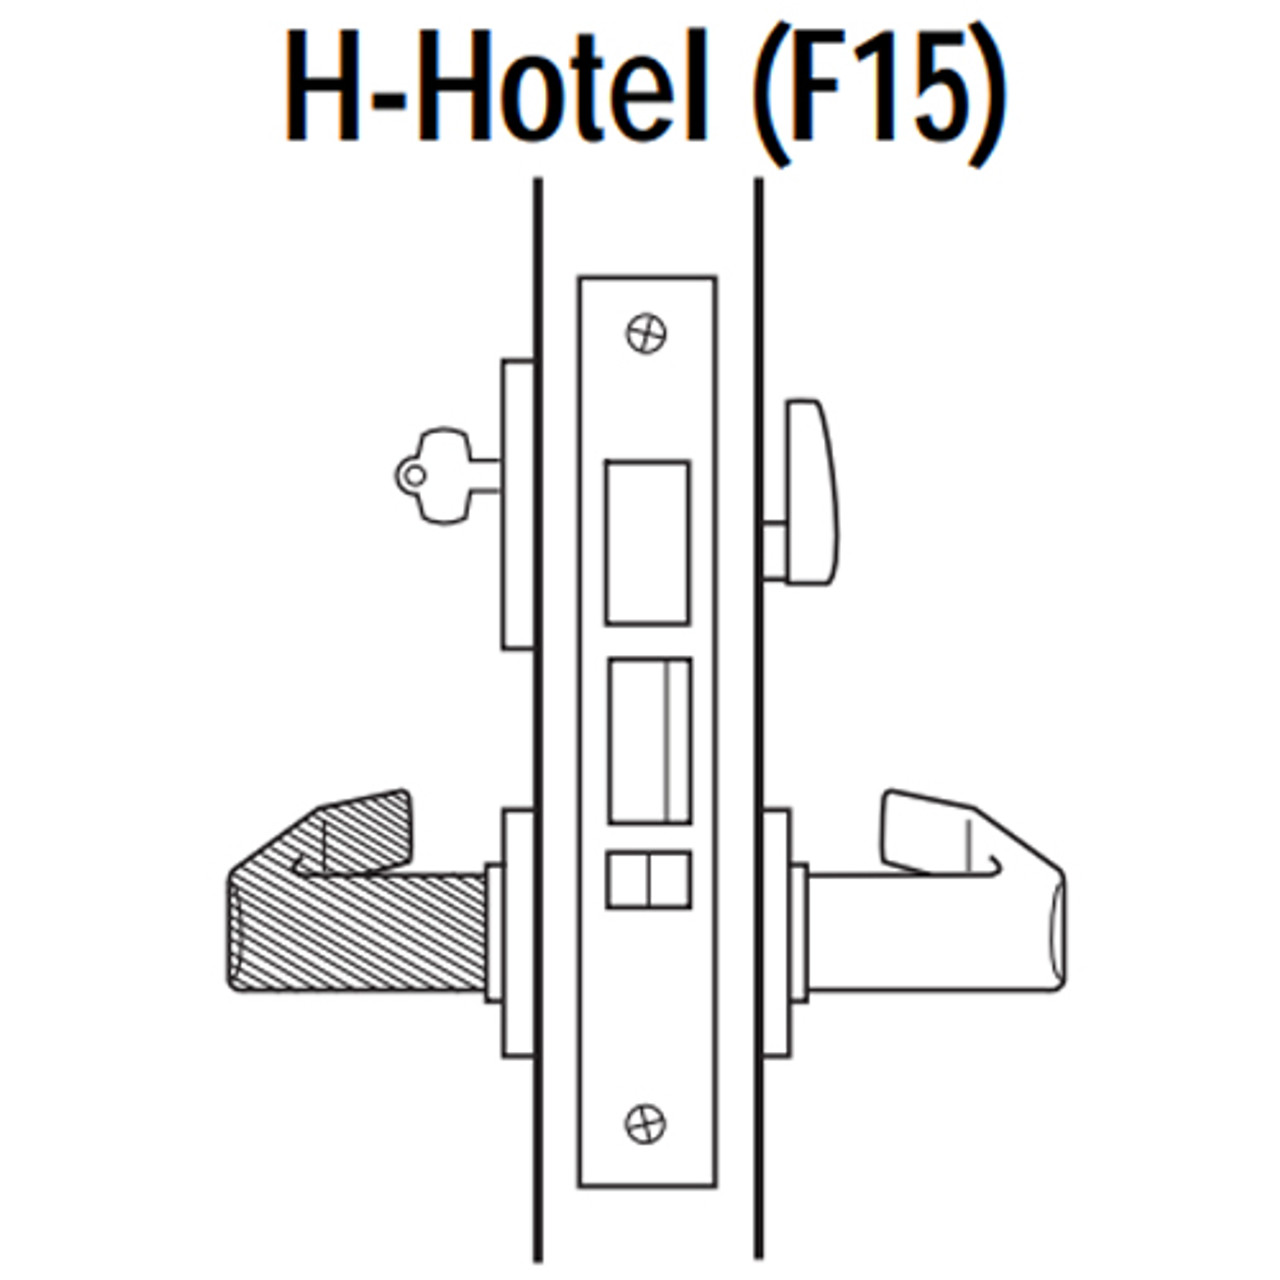 45H7H17RH625 Best 40H Series Hotel with Deadbolt Heavy Duty Mortise Lever Lock with Gull Wing RH in Bright Chrome